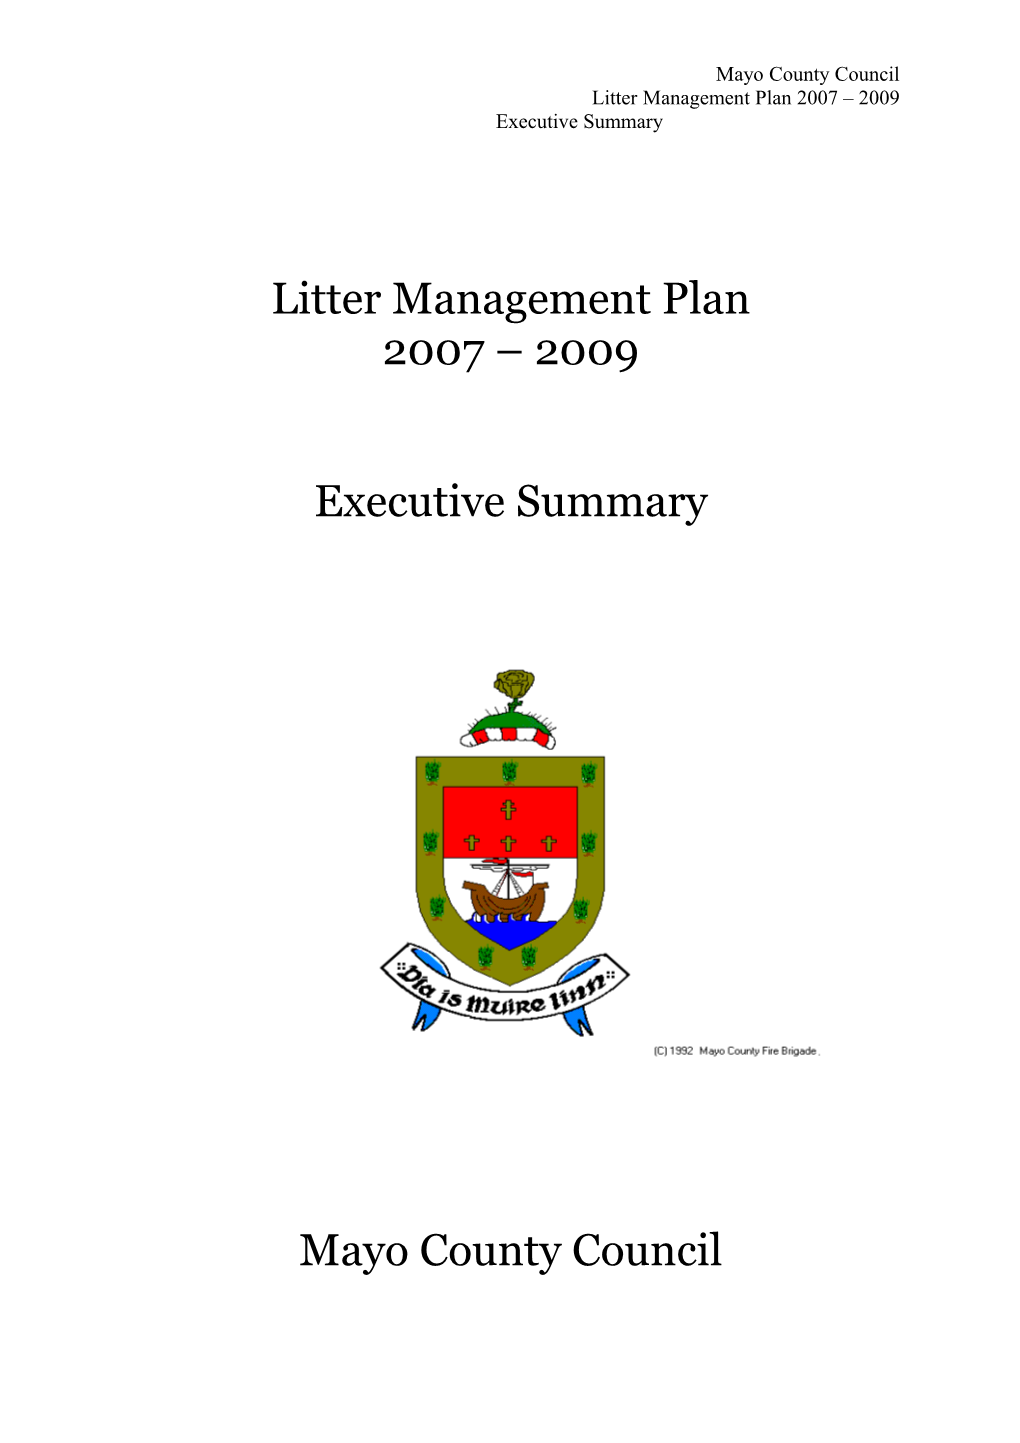 Mayo County Council Litter Management Plan 2007 2009